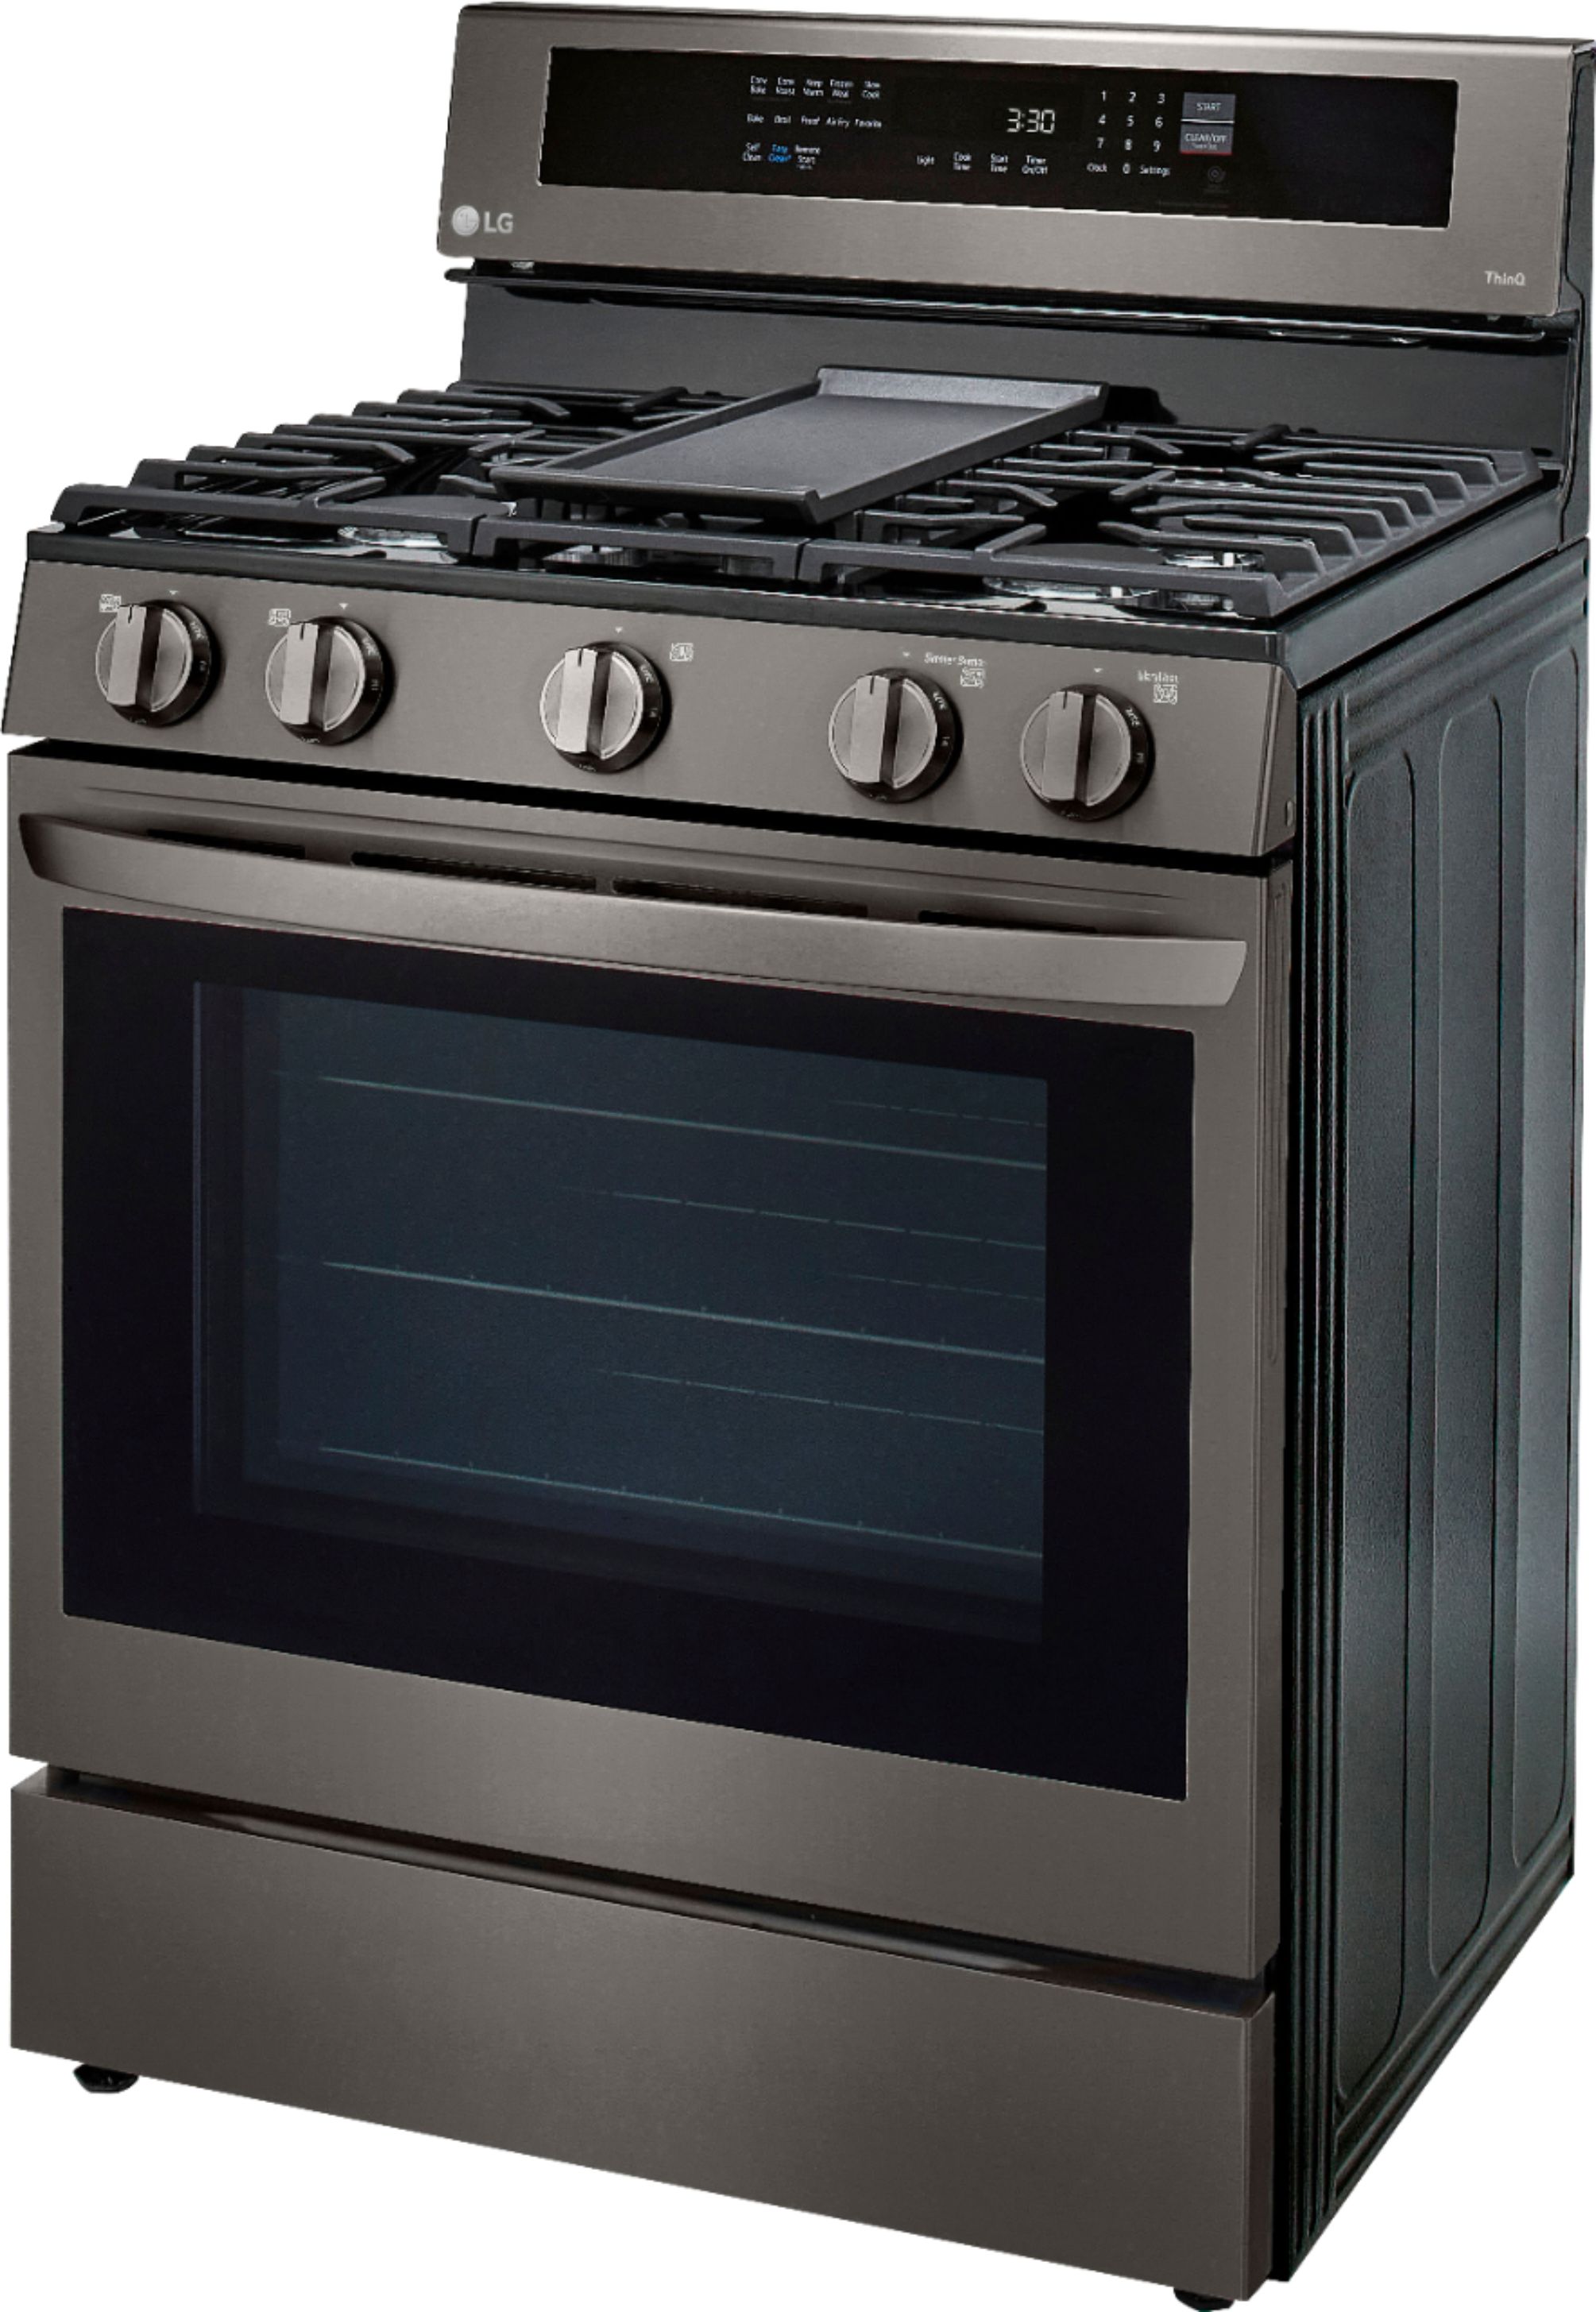 Angle View: LG - 6.3 Cu. Ft. Self-Cleaning Slide-In Gas Range with ProBake Convection - Stainless steel